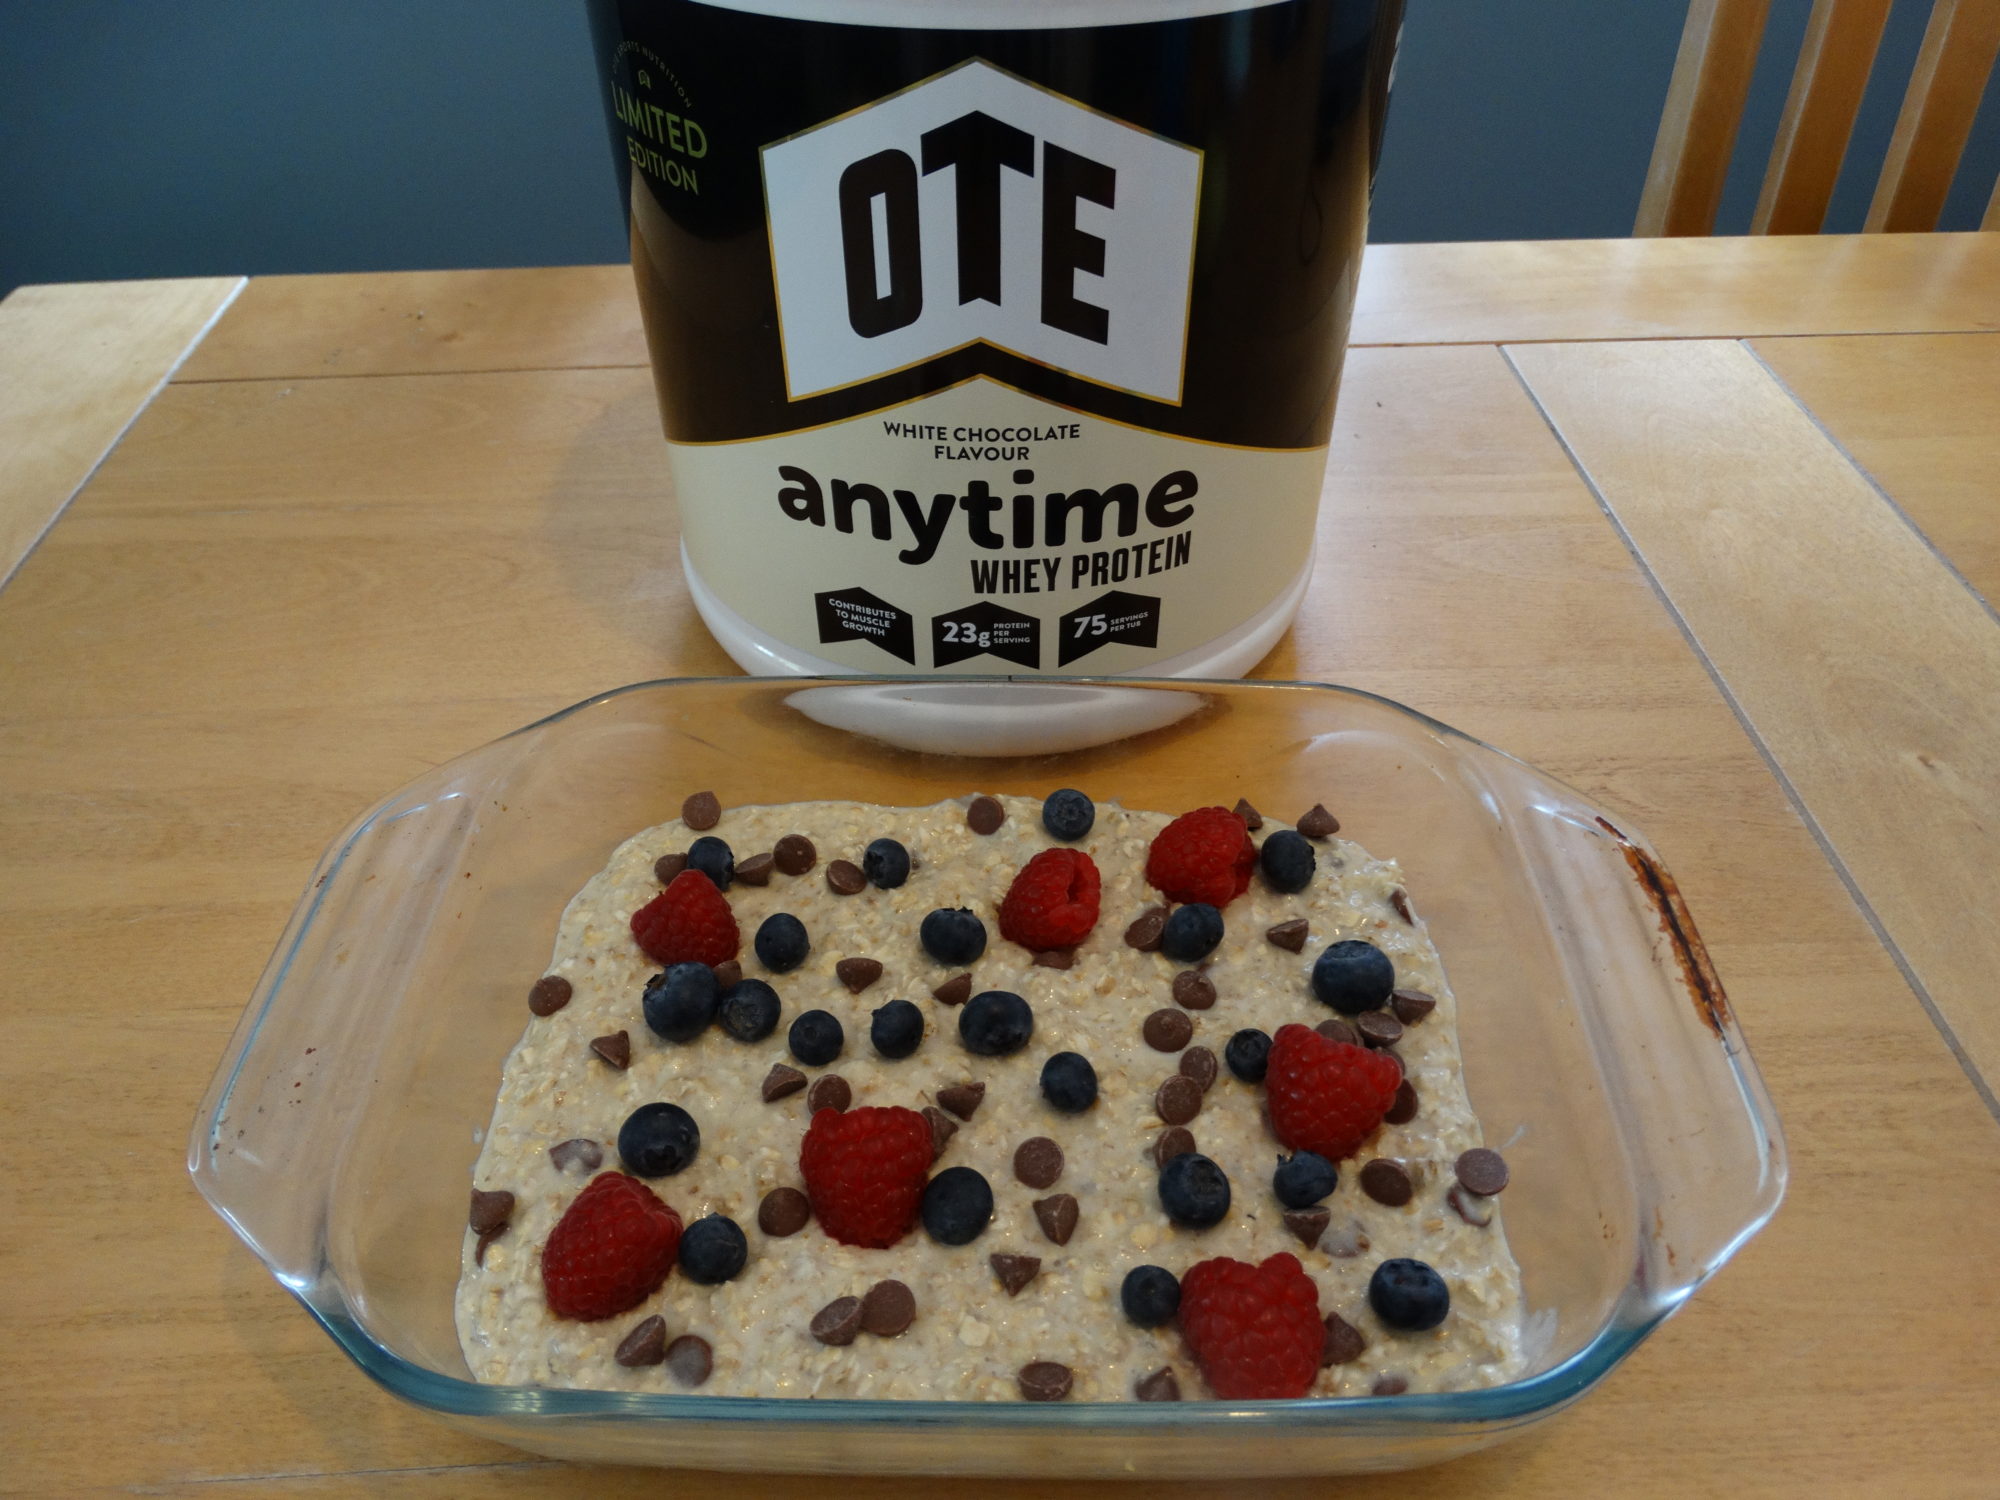 Baked oats recipe containing OTE Anytime Whey Protein